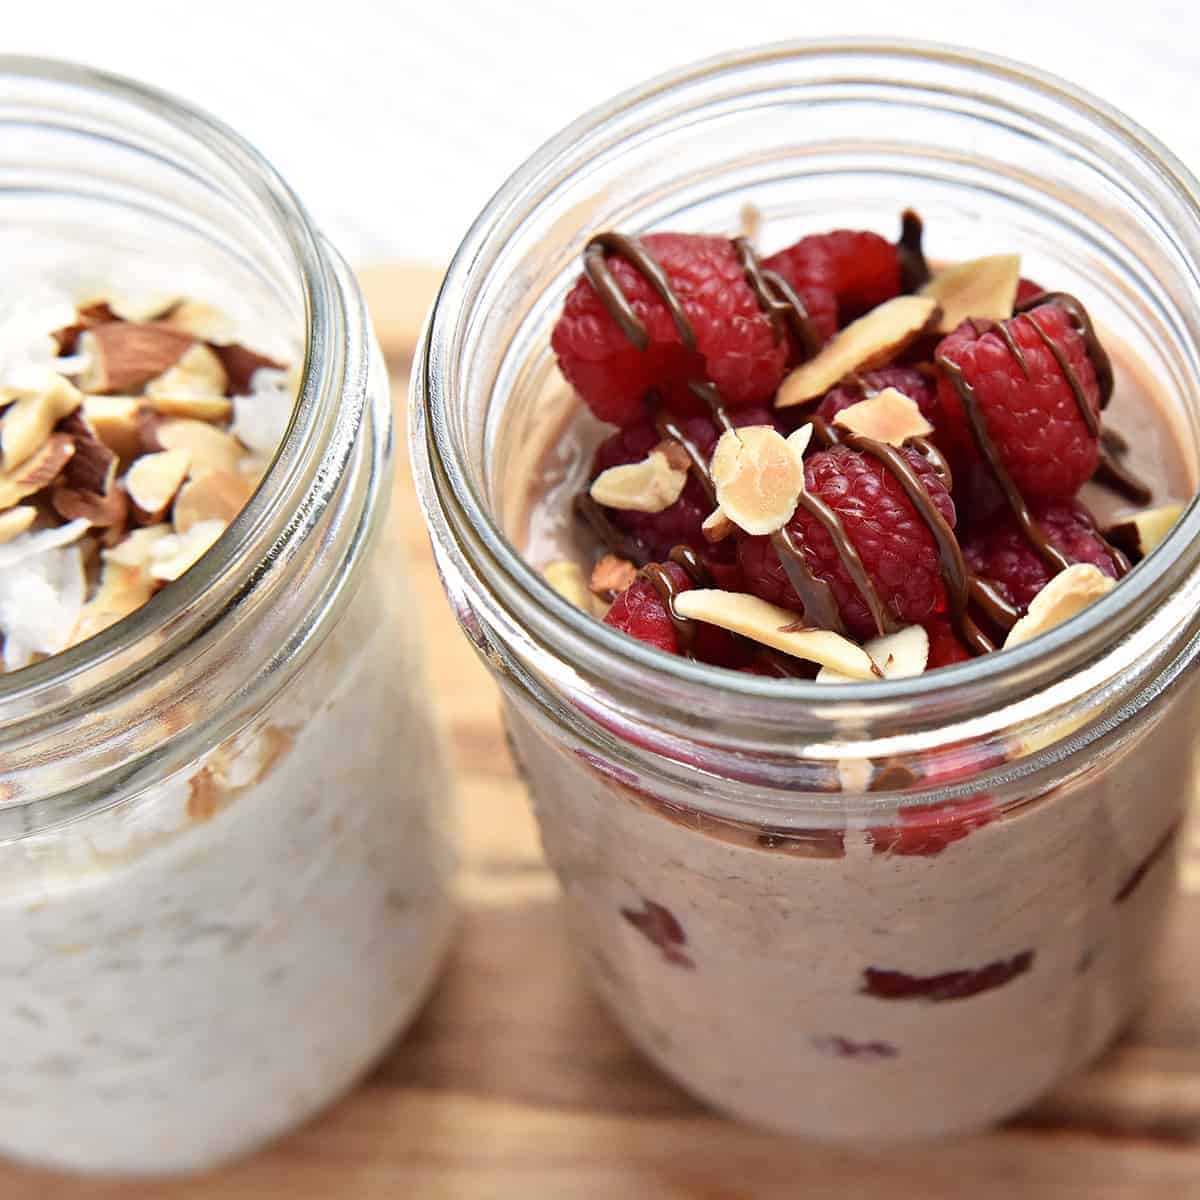 Meal Prep Oatmeal for Busy Mornings (Best tips) - No Getting Off This Train